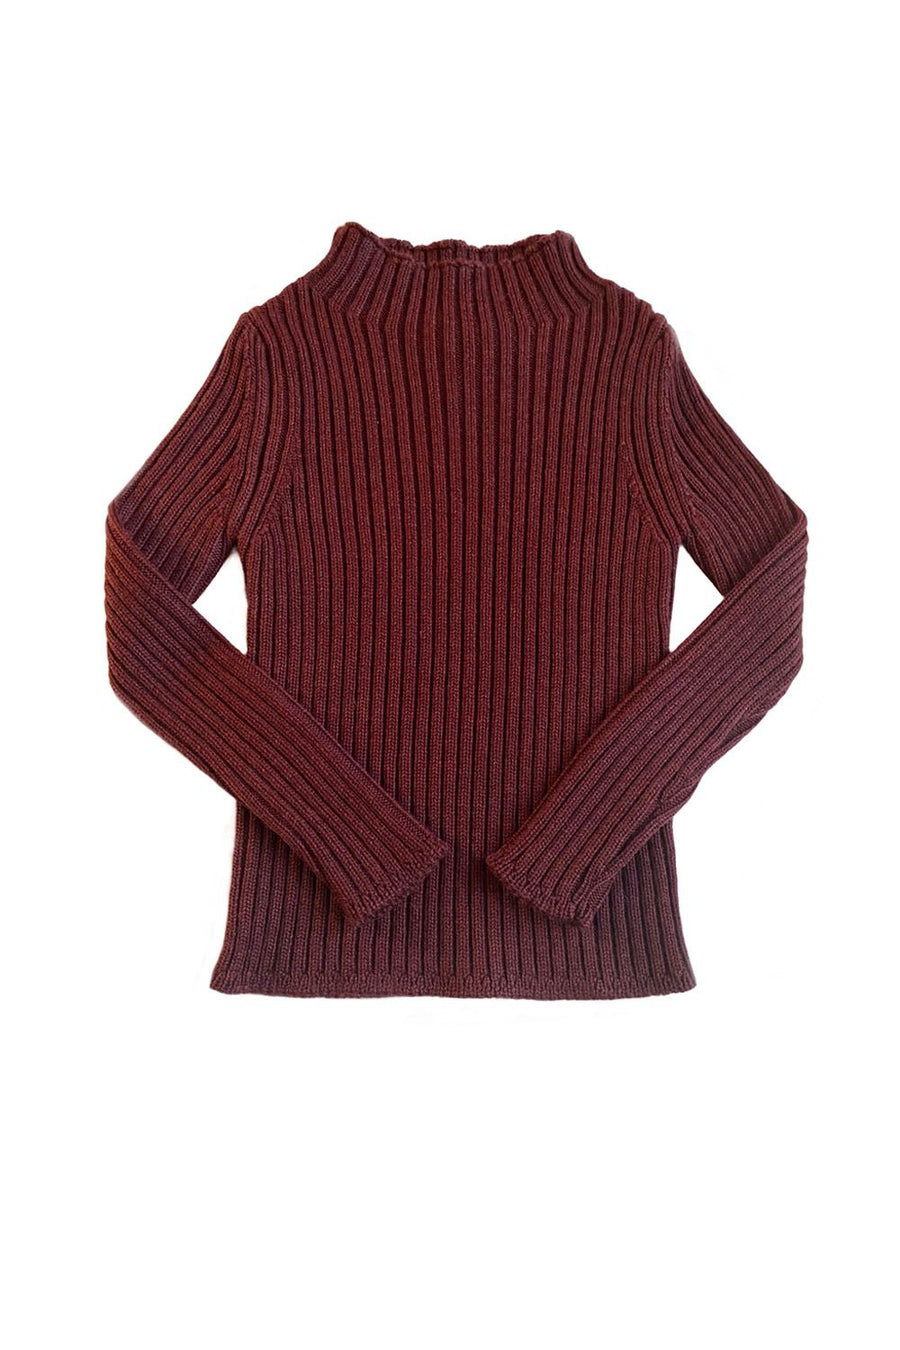 Berry Mock Neck Knitted Pullover by Mabli